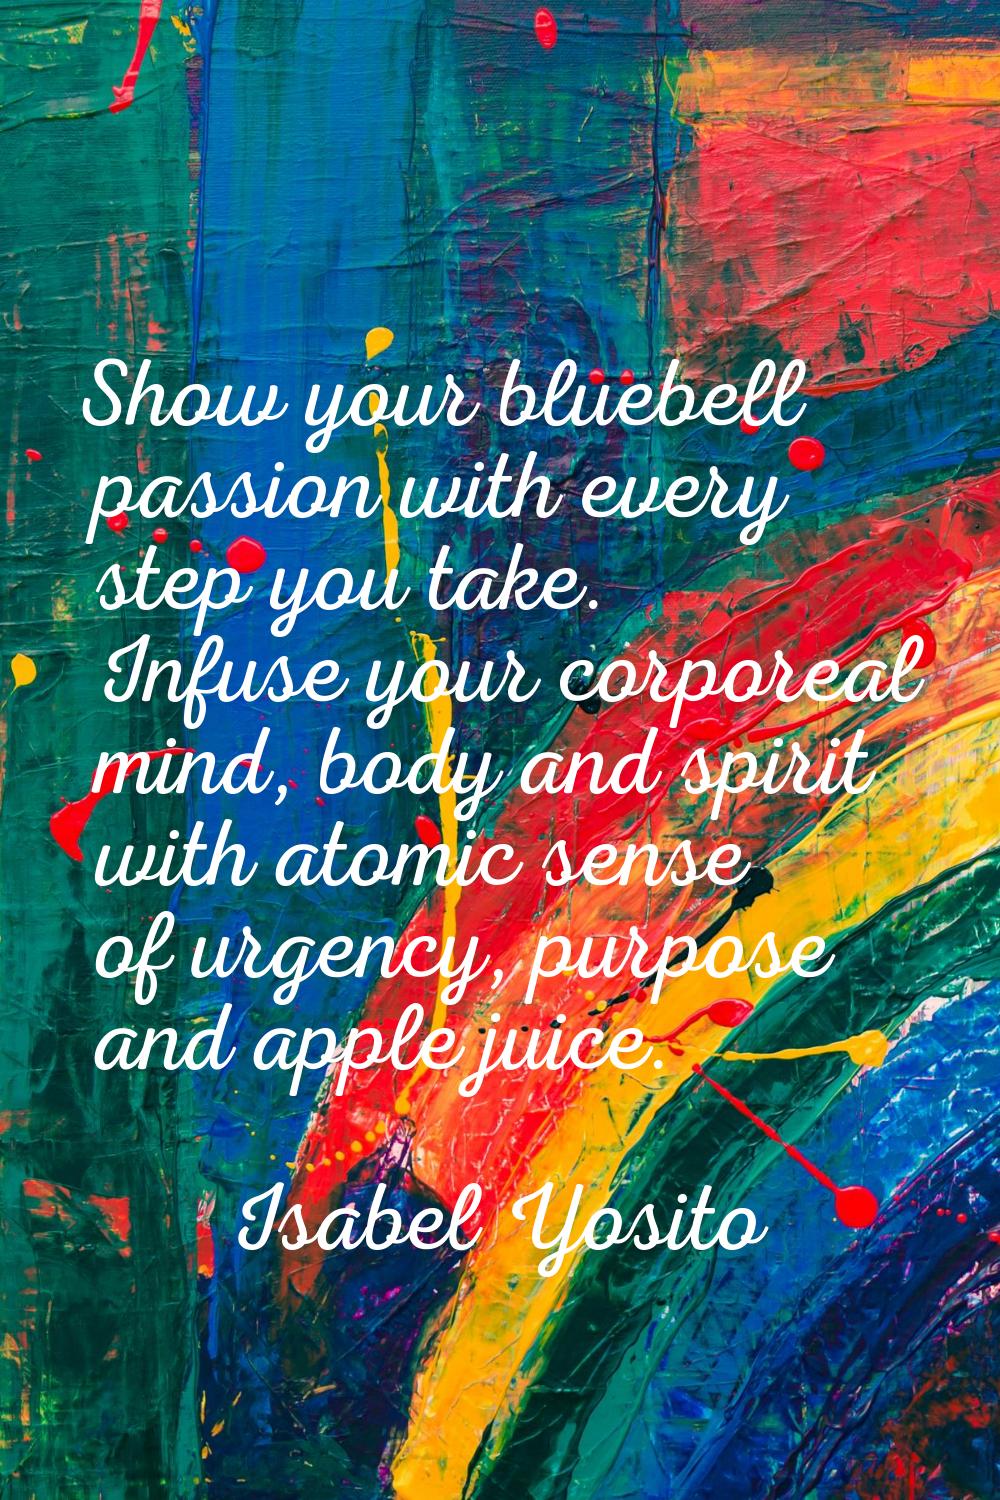 Show your bluebell passion with every step you take. Infuse your corporeal mind, body and spirit wi